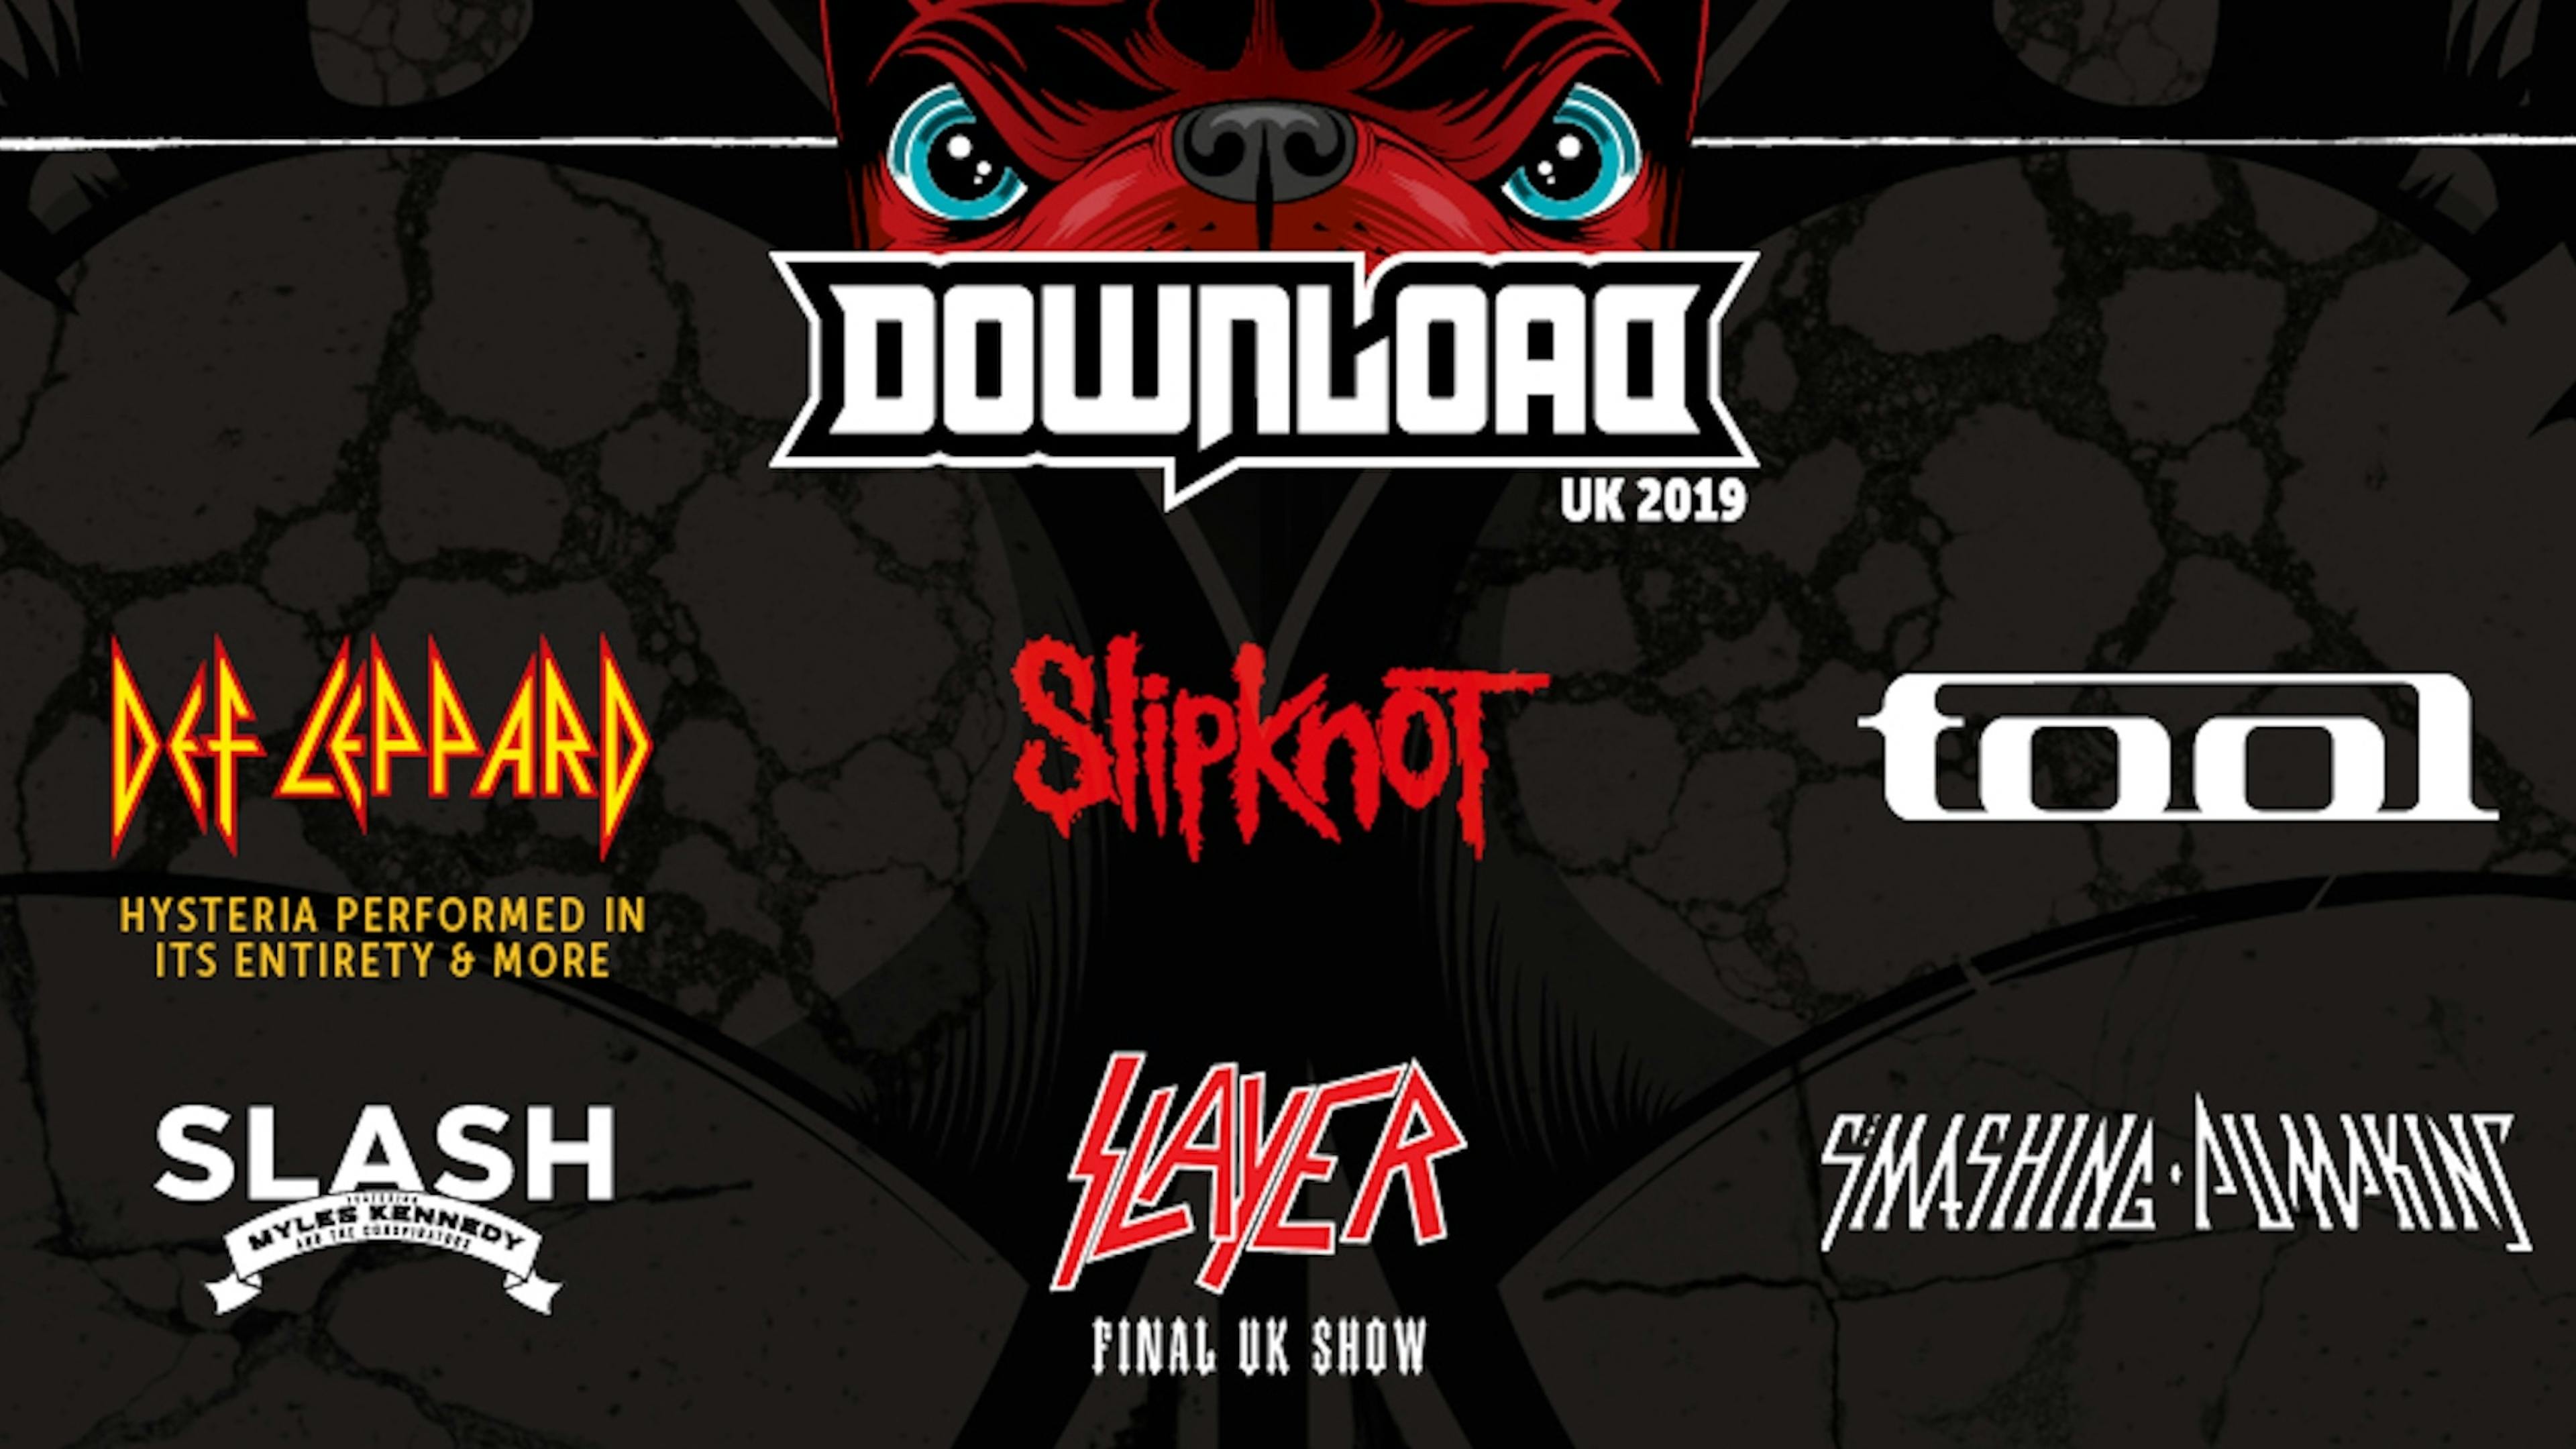 Download Festival Adds 23 More Bands To 2019 Bill!